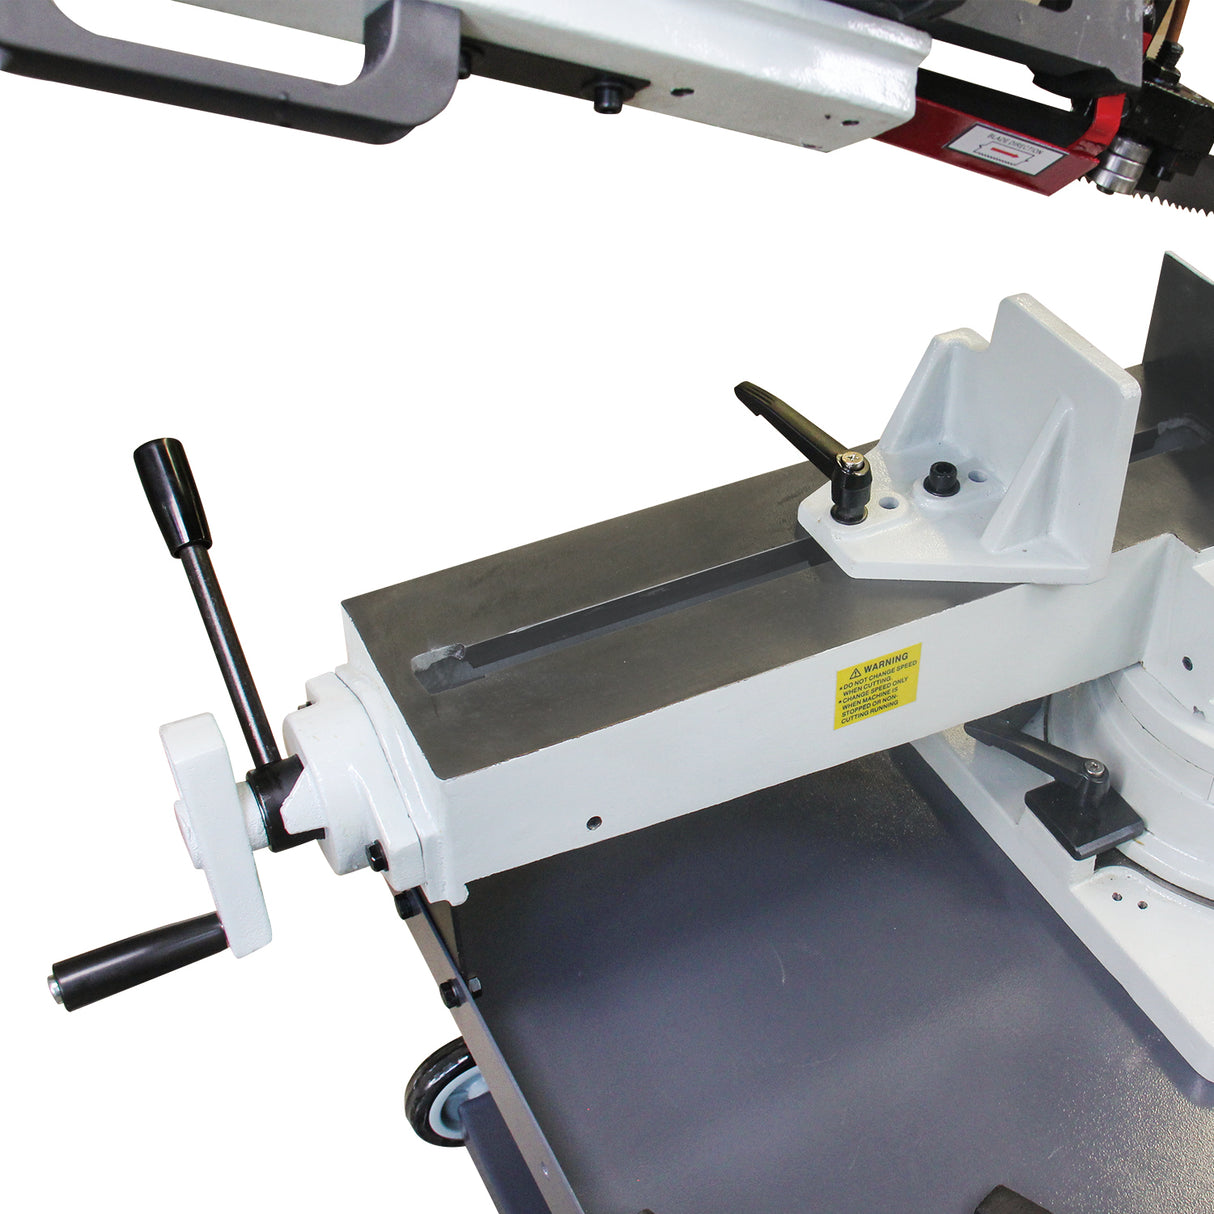 KANG INDUSTRIAL BS-912GR, Gear Drive Band Saw, 209 mm Round Bar Cutting Saw Machine with 3 Cutting Speed, 240V Power